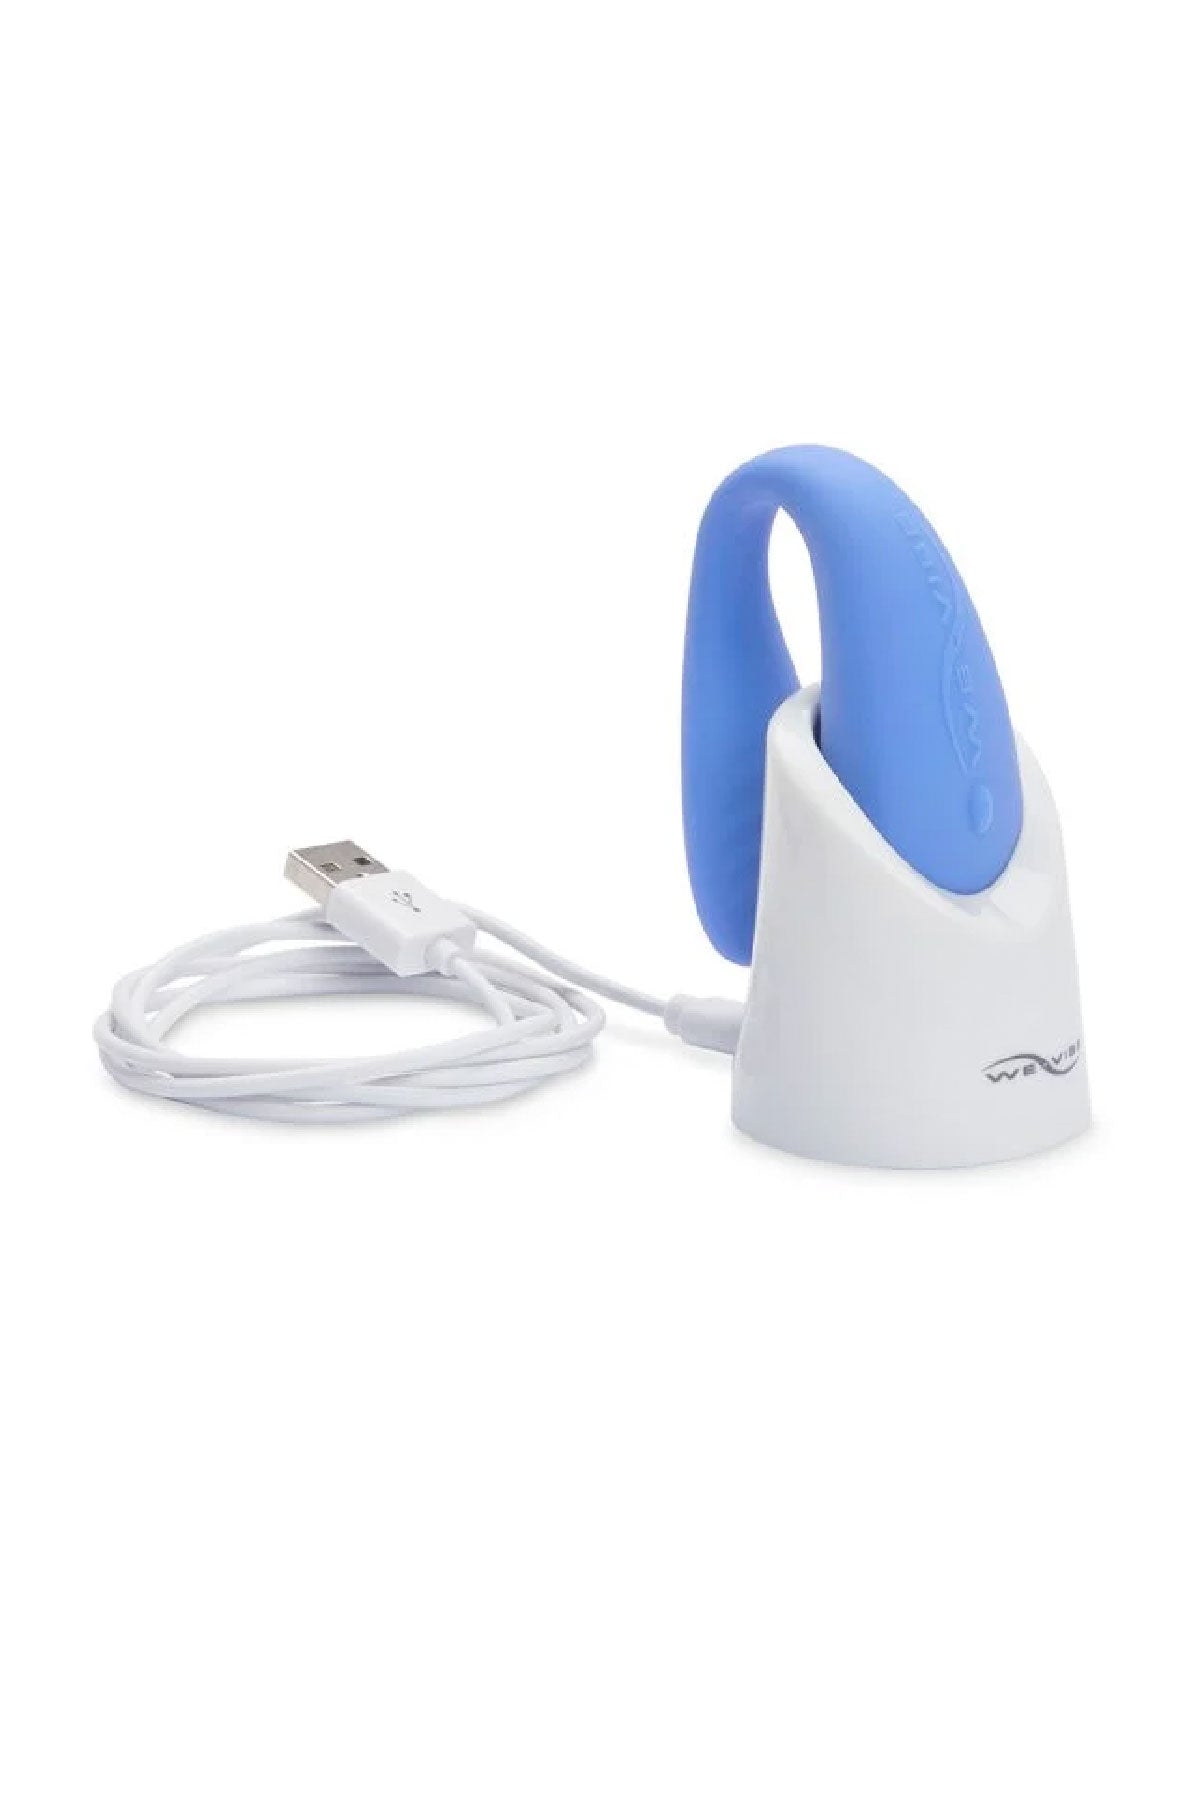 We-Vibe Match Couples Vibrator Charger